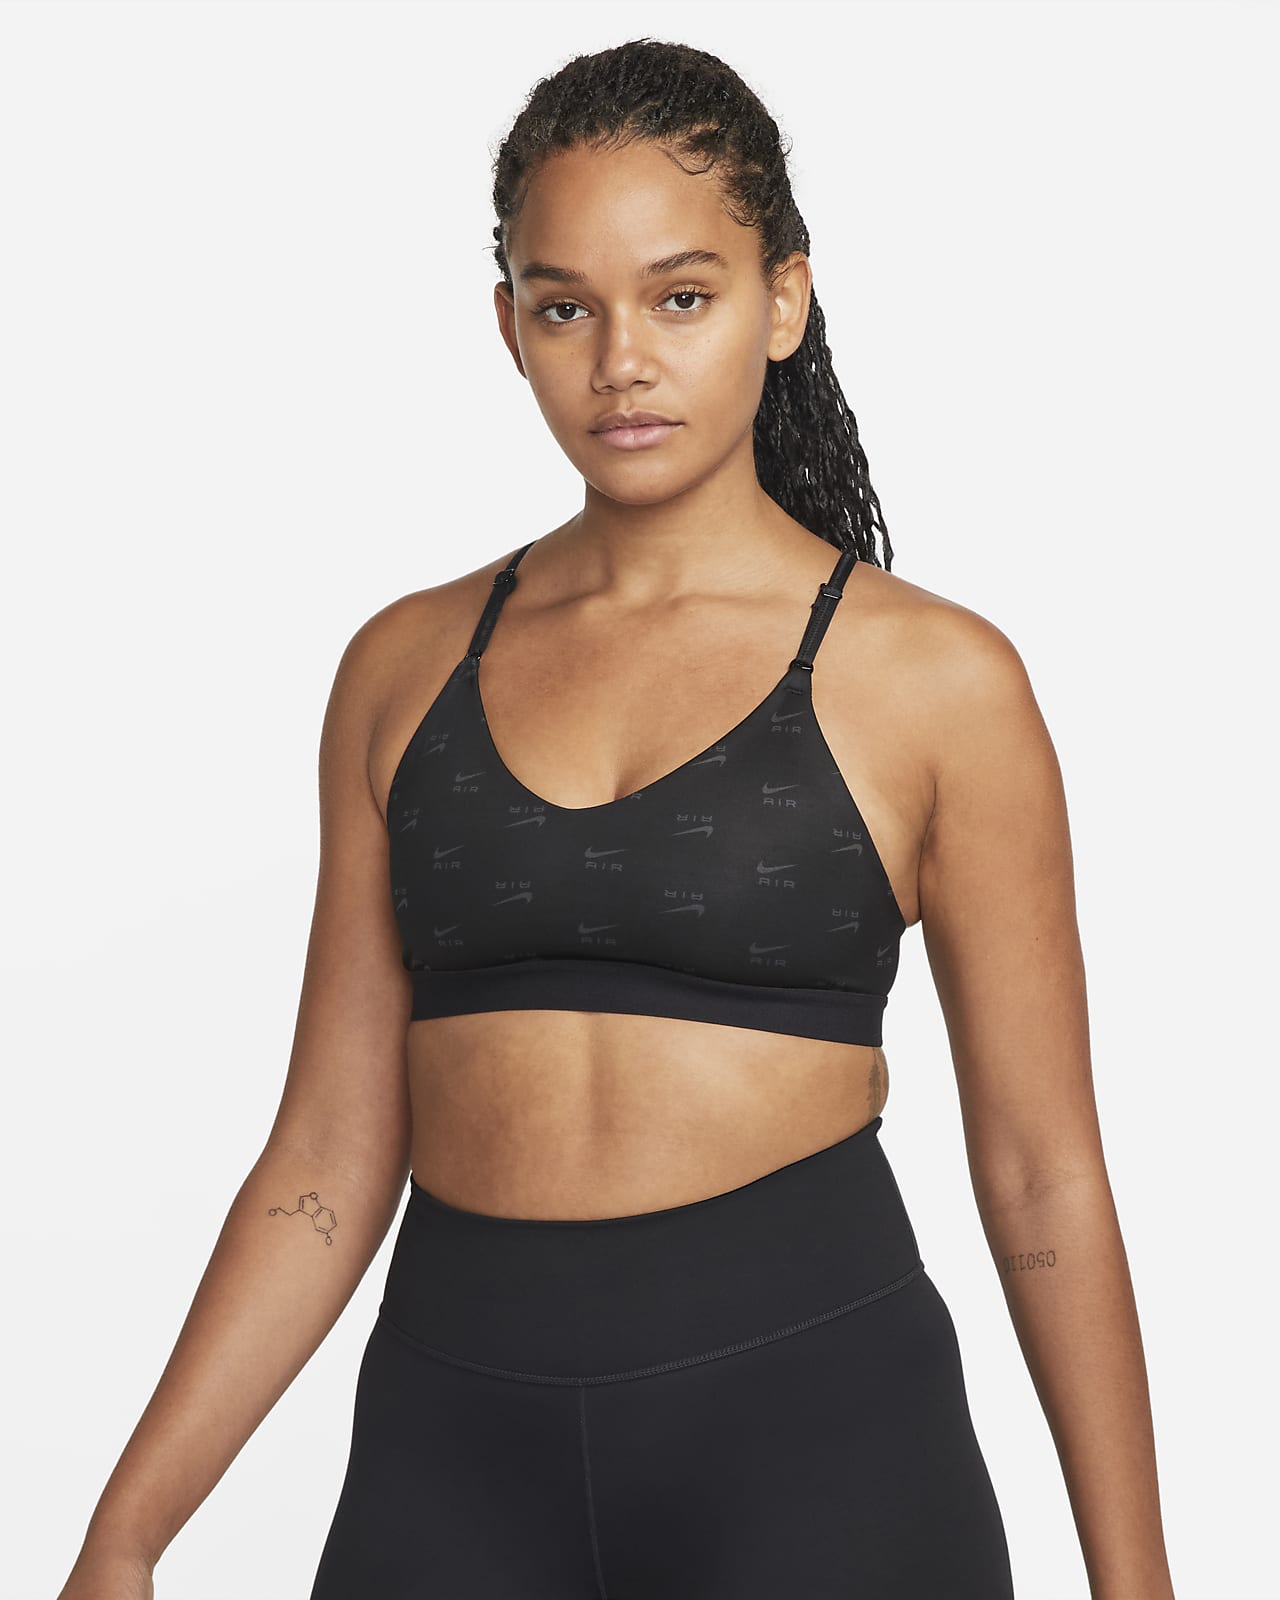 Nike Air Indy Women's Light-Support Non-Padded Printed Sports Bra. LU